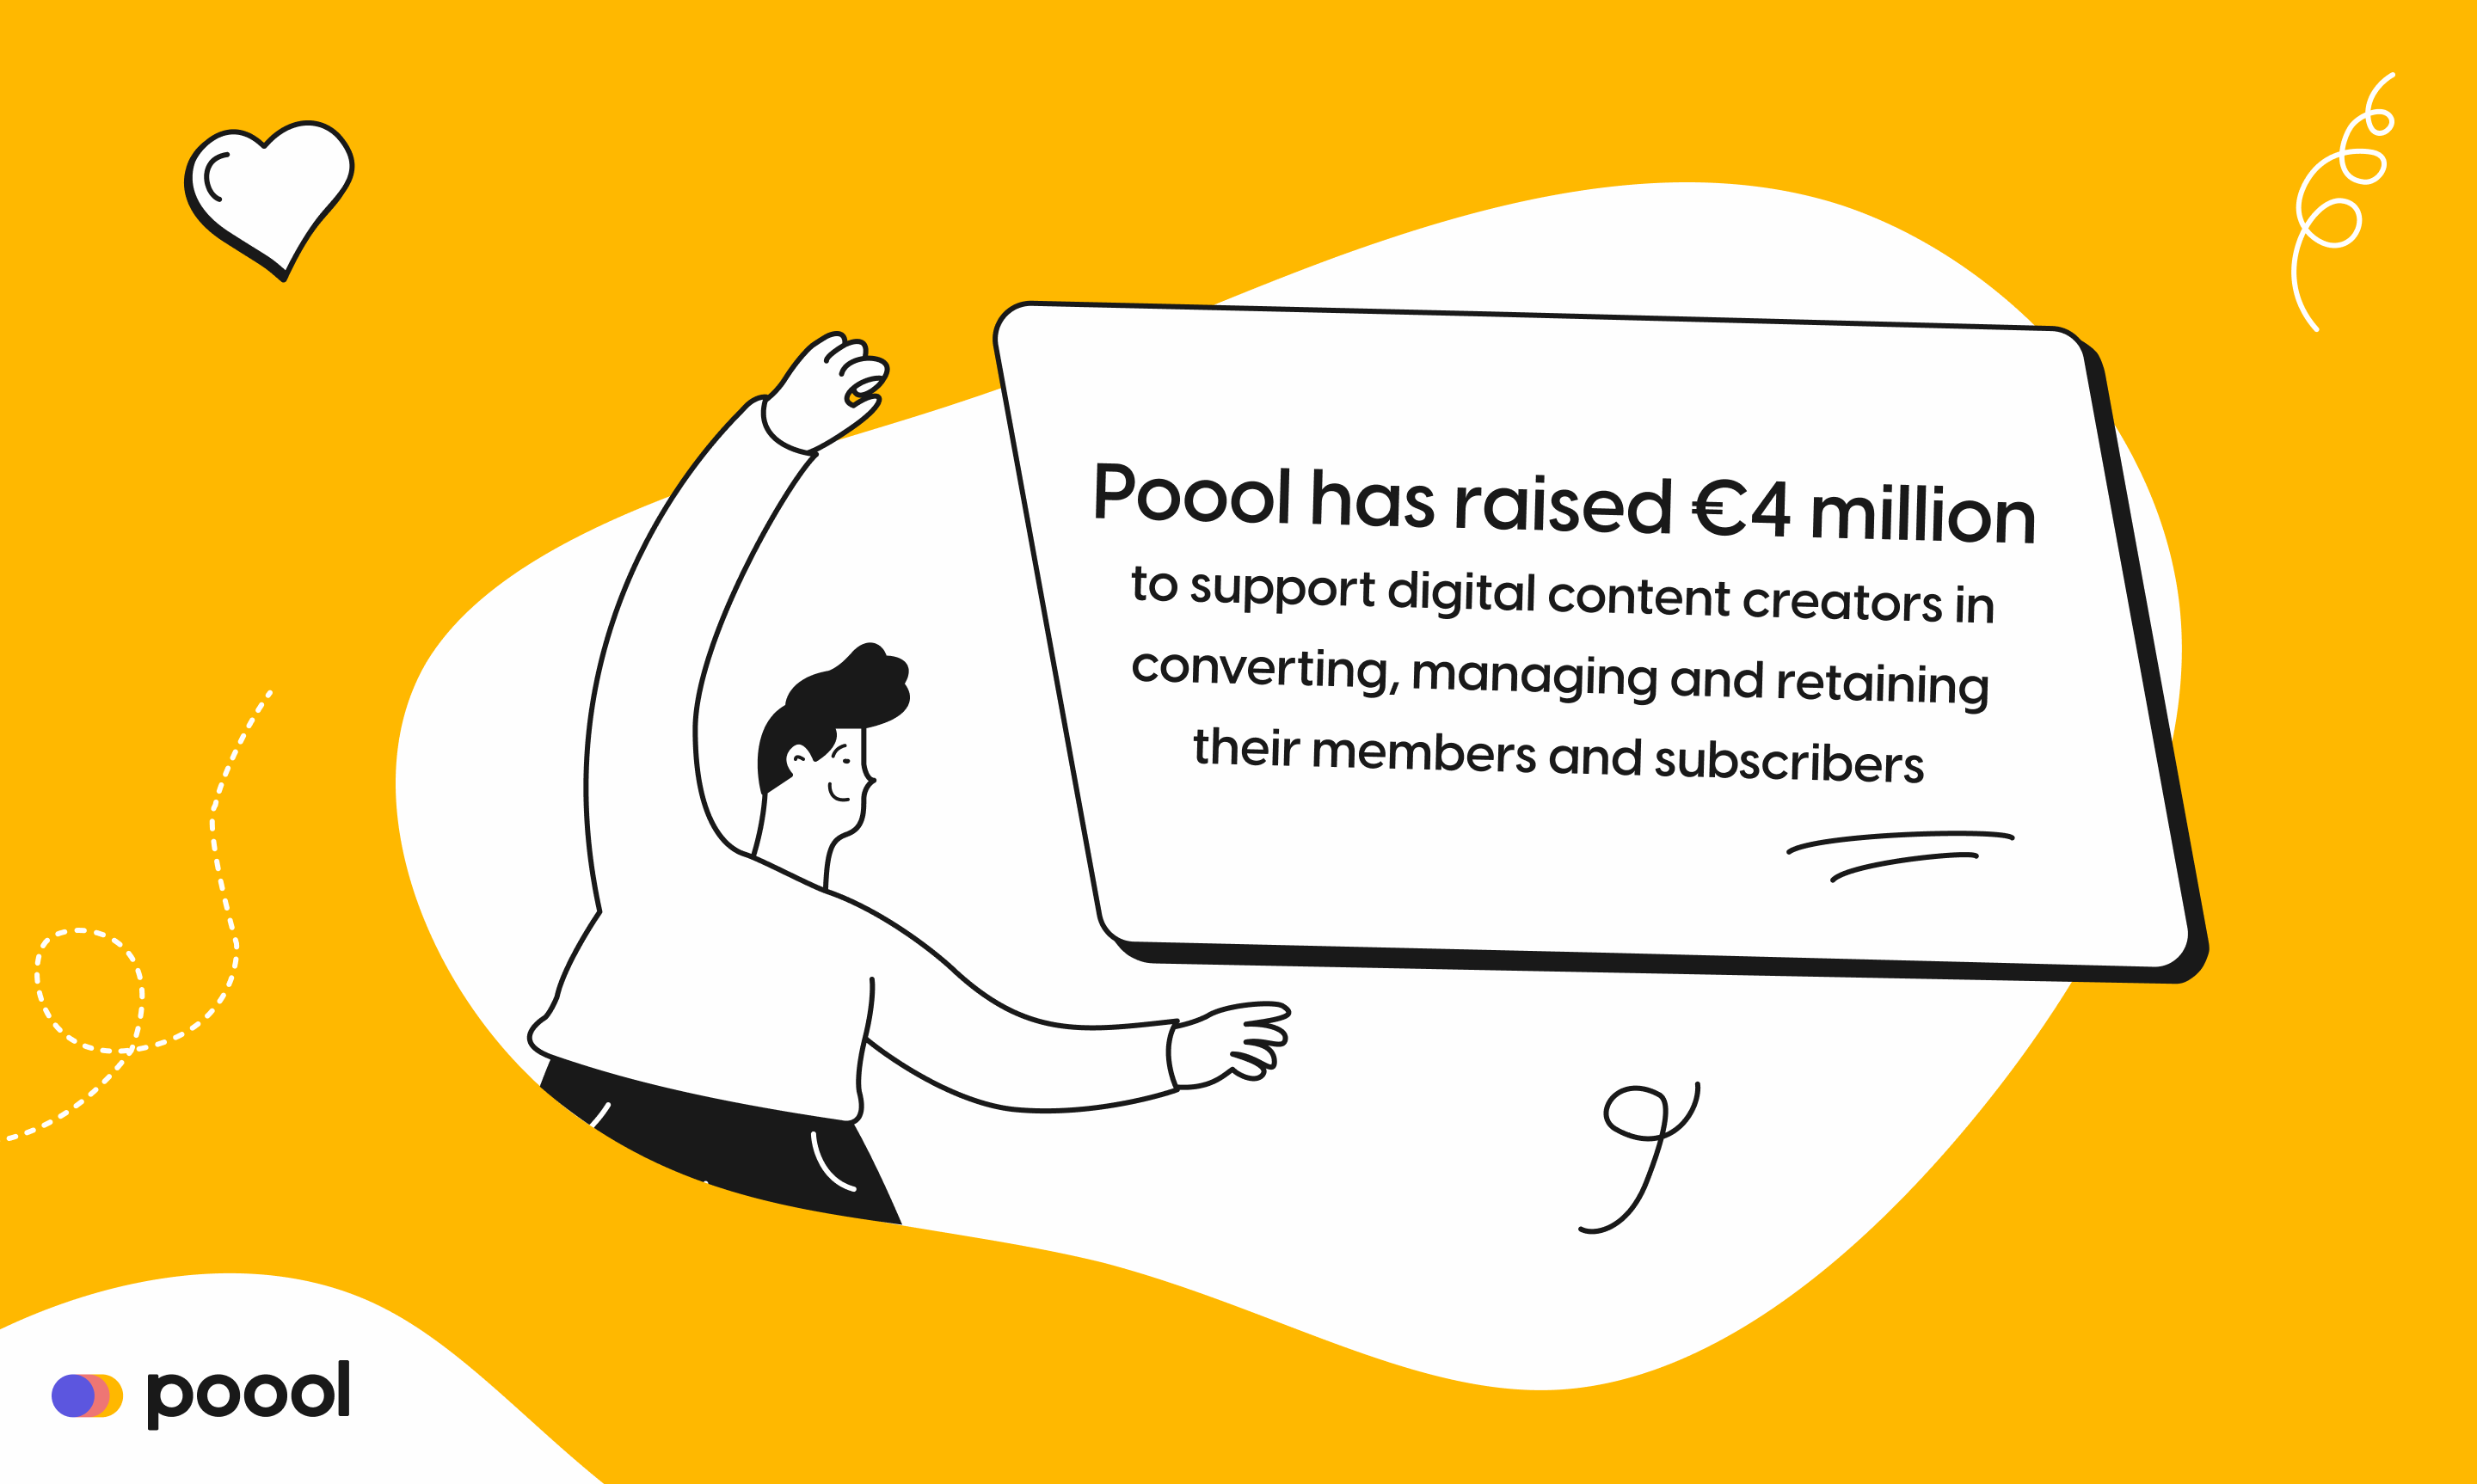 Poool announces €4 million fundraising for The Membership & Subscription Suite